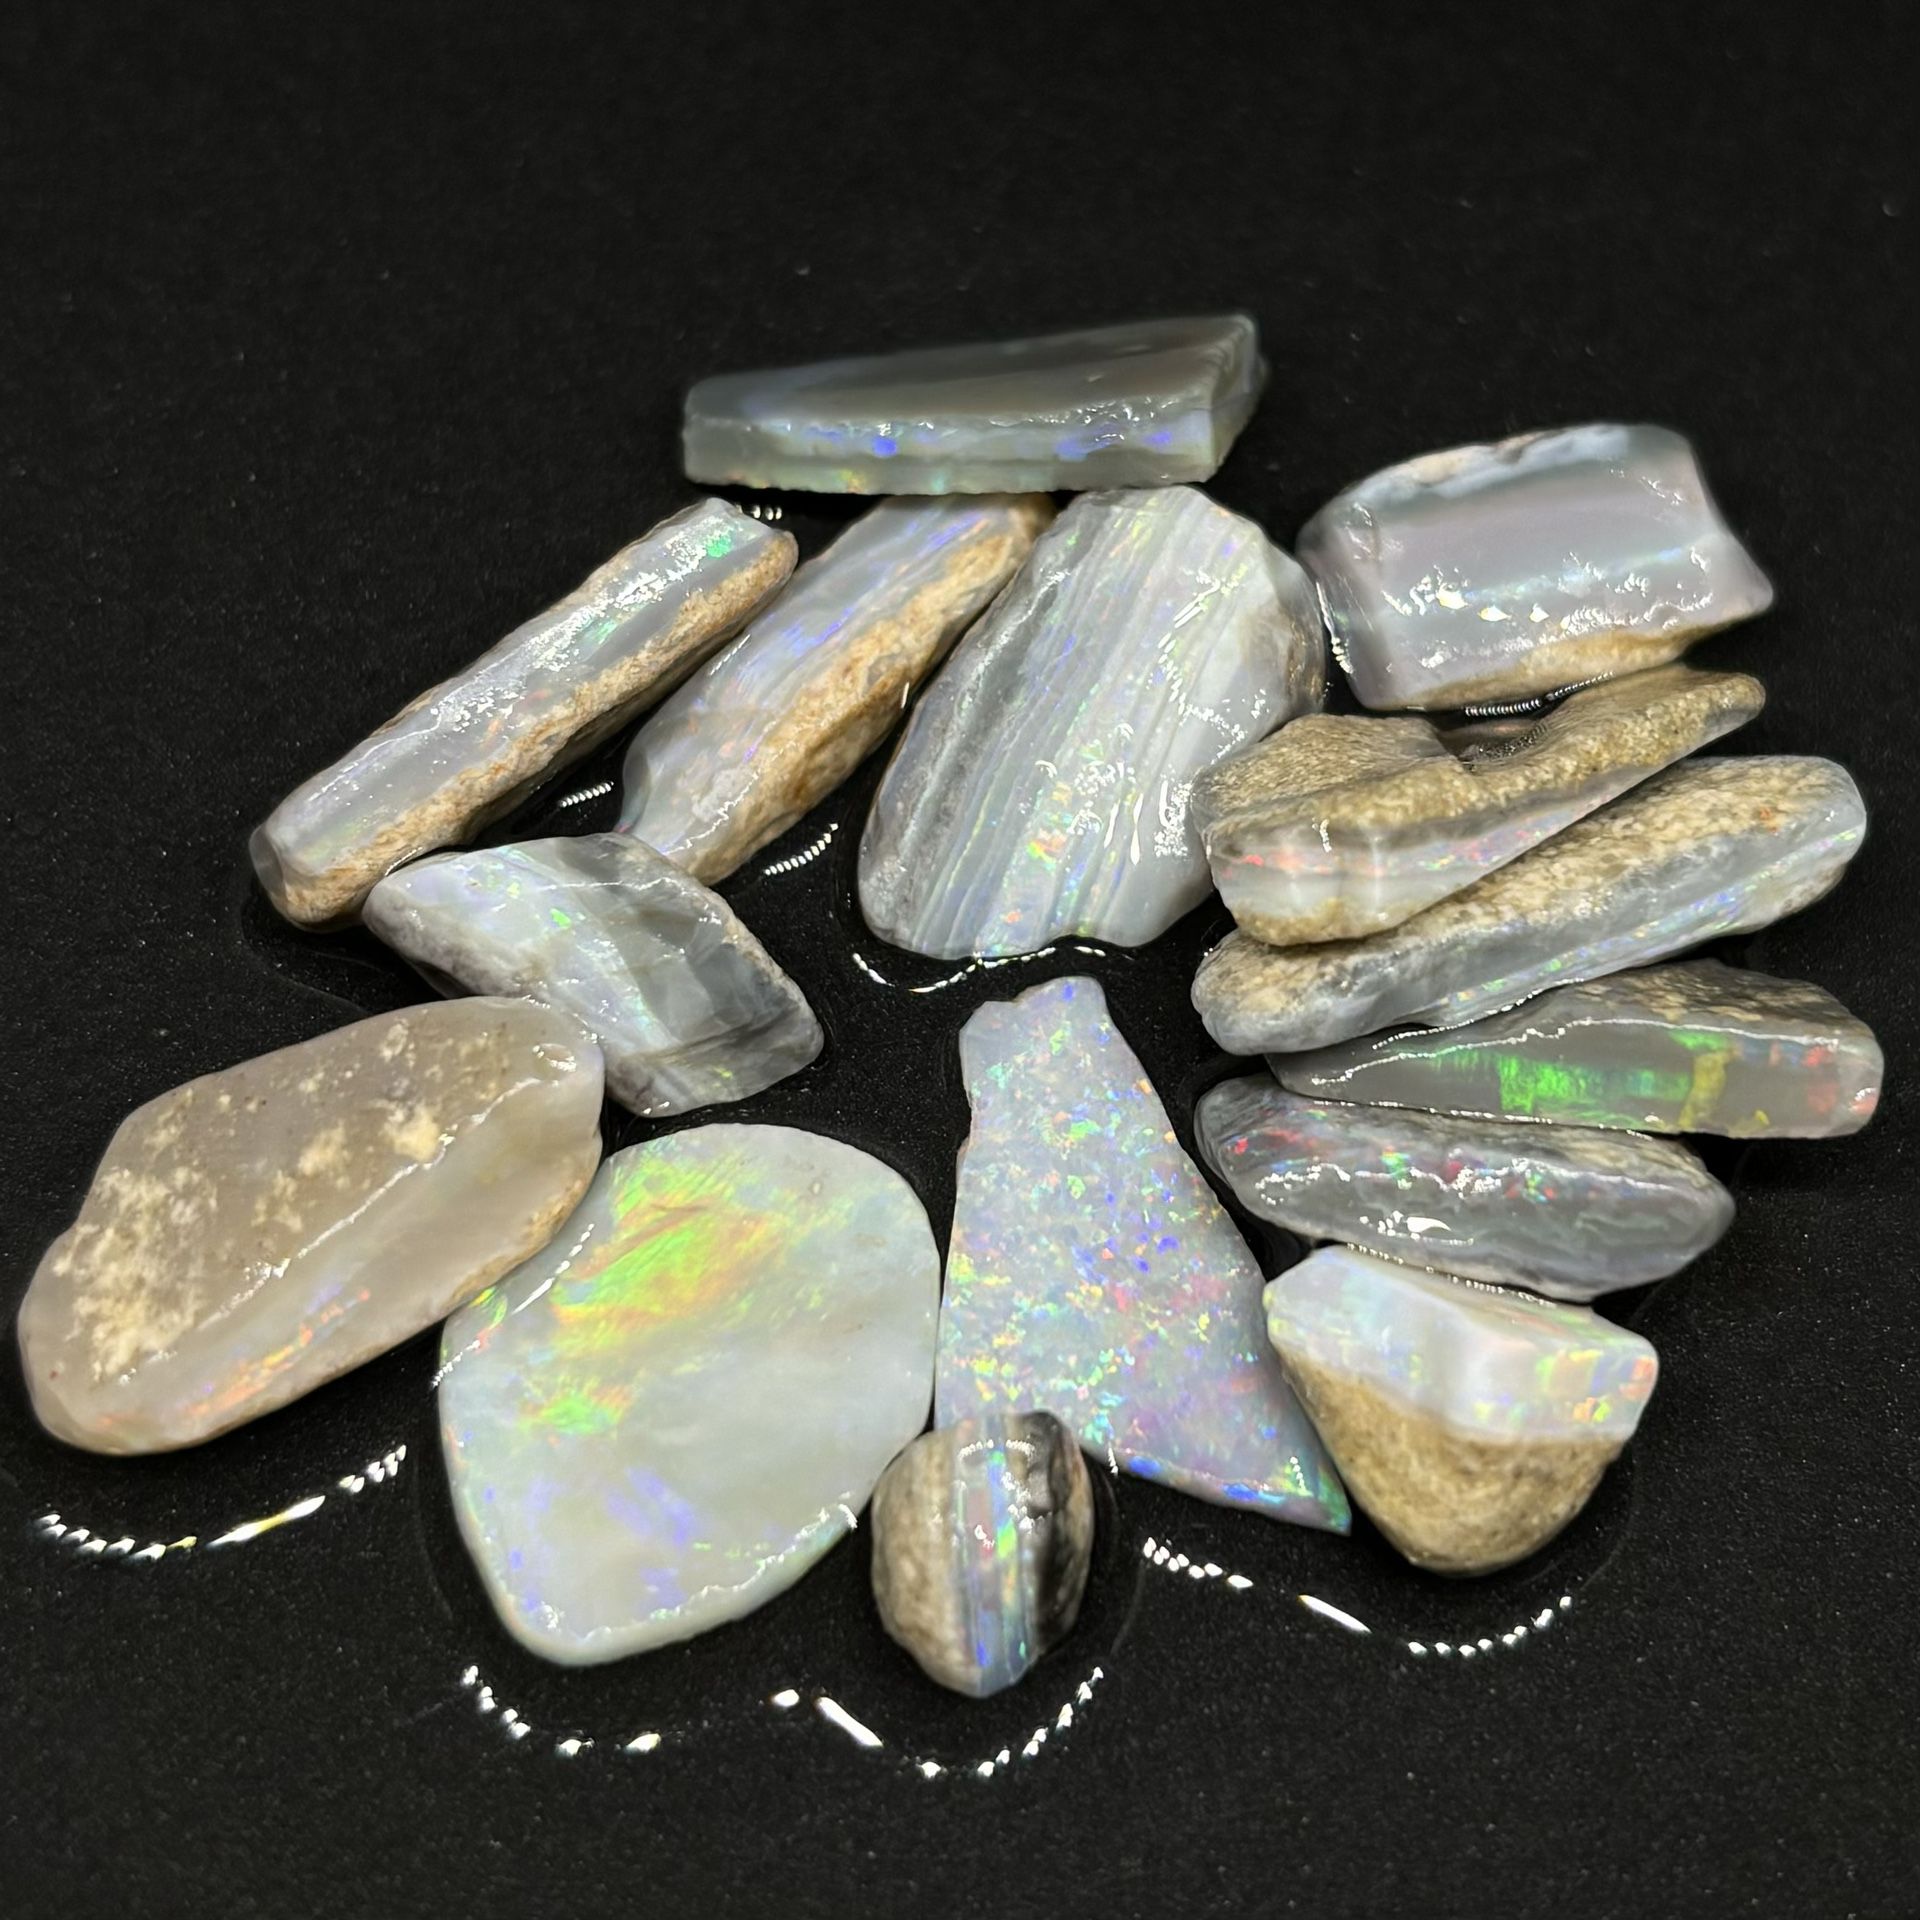 Superb Australian Mintabie Top Rough Opal Picks With Stunning Colored Patterns